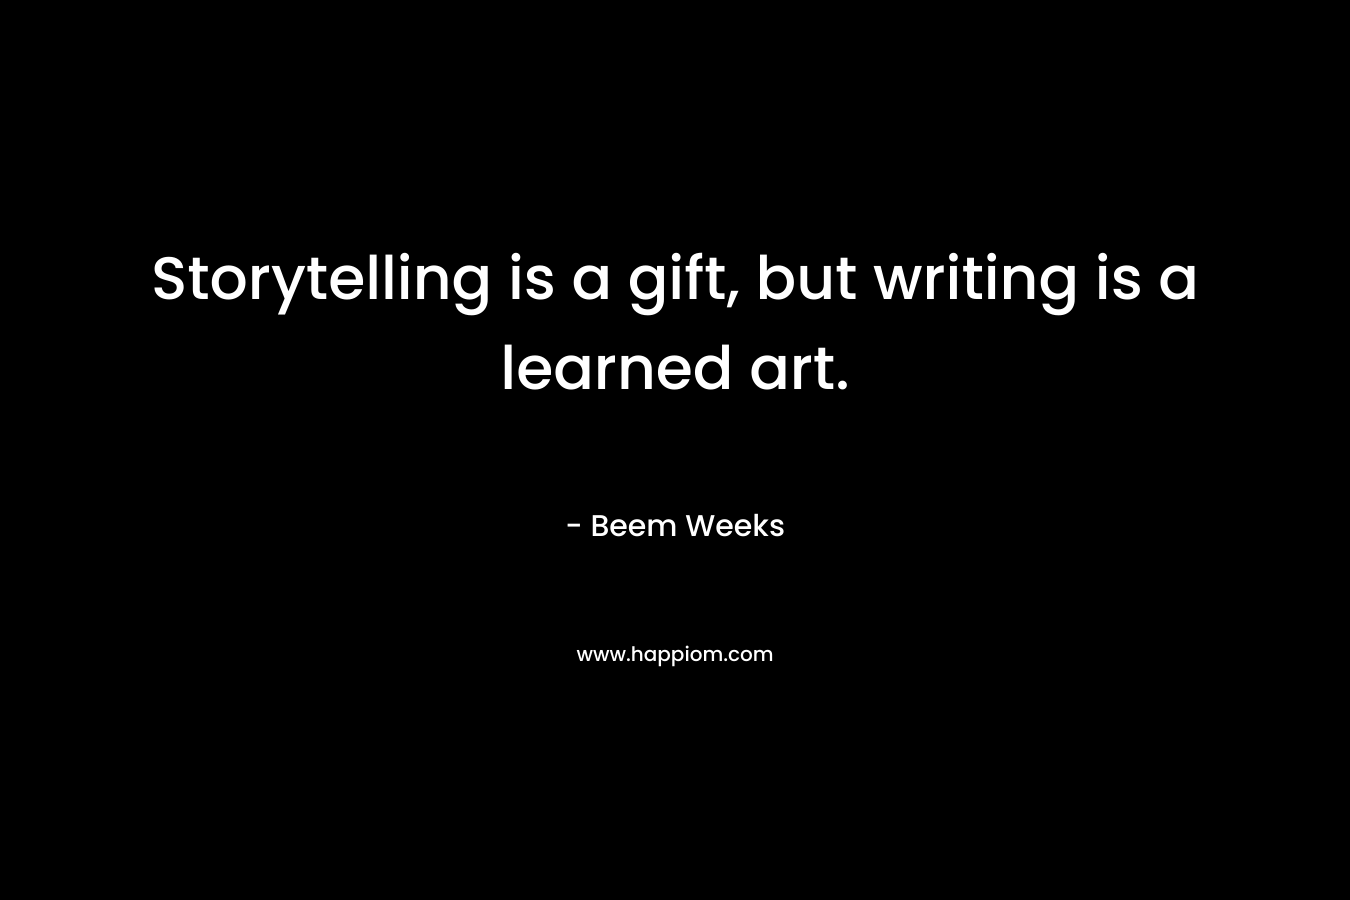 Storytelling is a gift, but writing is a learned art. – Beem Weeks